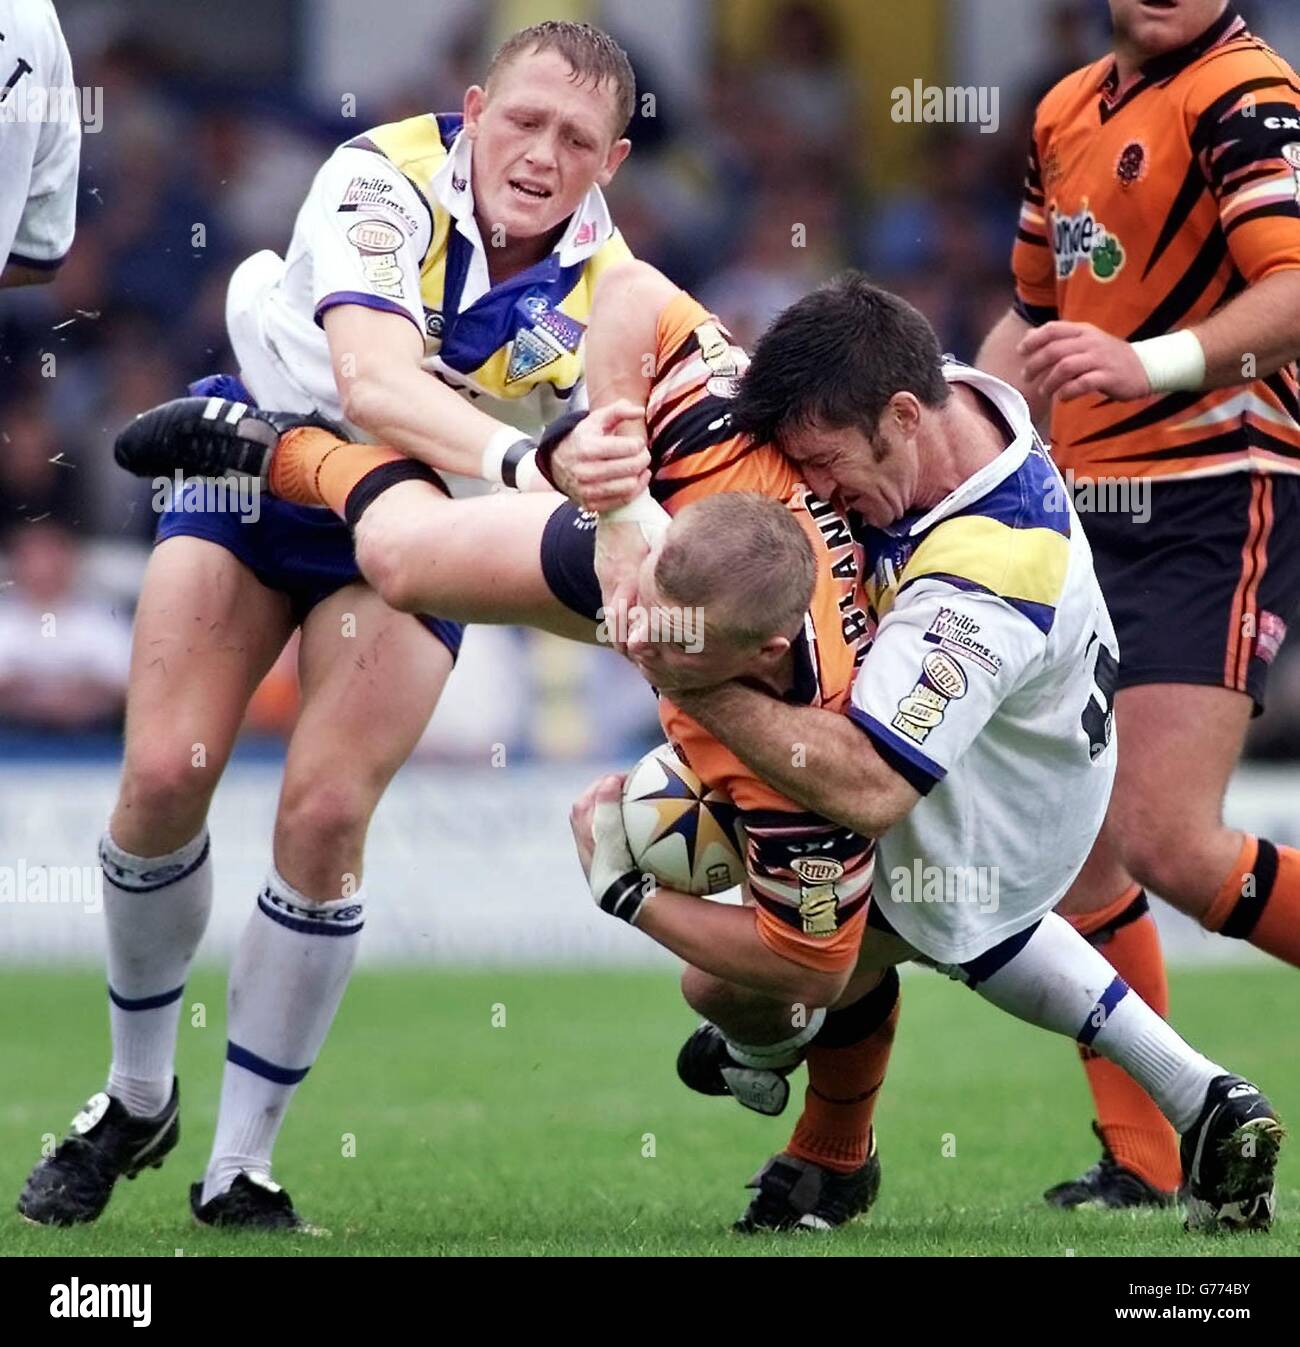 Castleford's Lee Harland is tackled by Warrington's Ben Westwood (left) and Nat Wood during their Tetley Bitter Super League game at Wilderspool, Warrington. Stock Photo